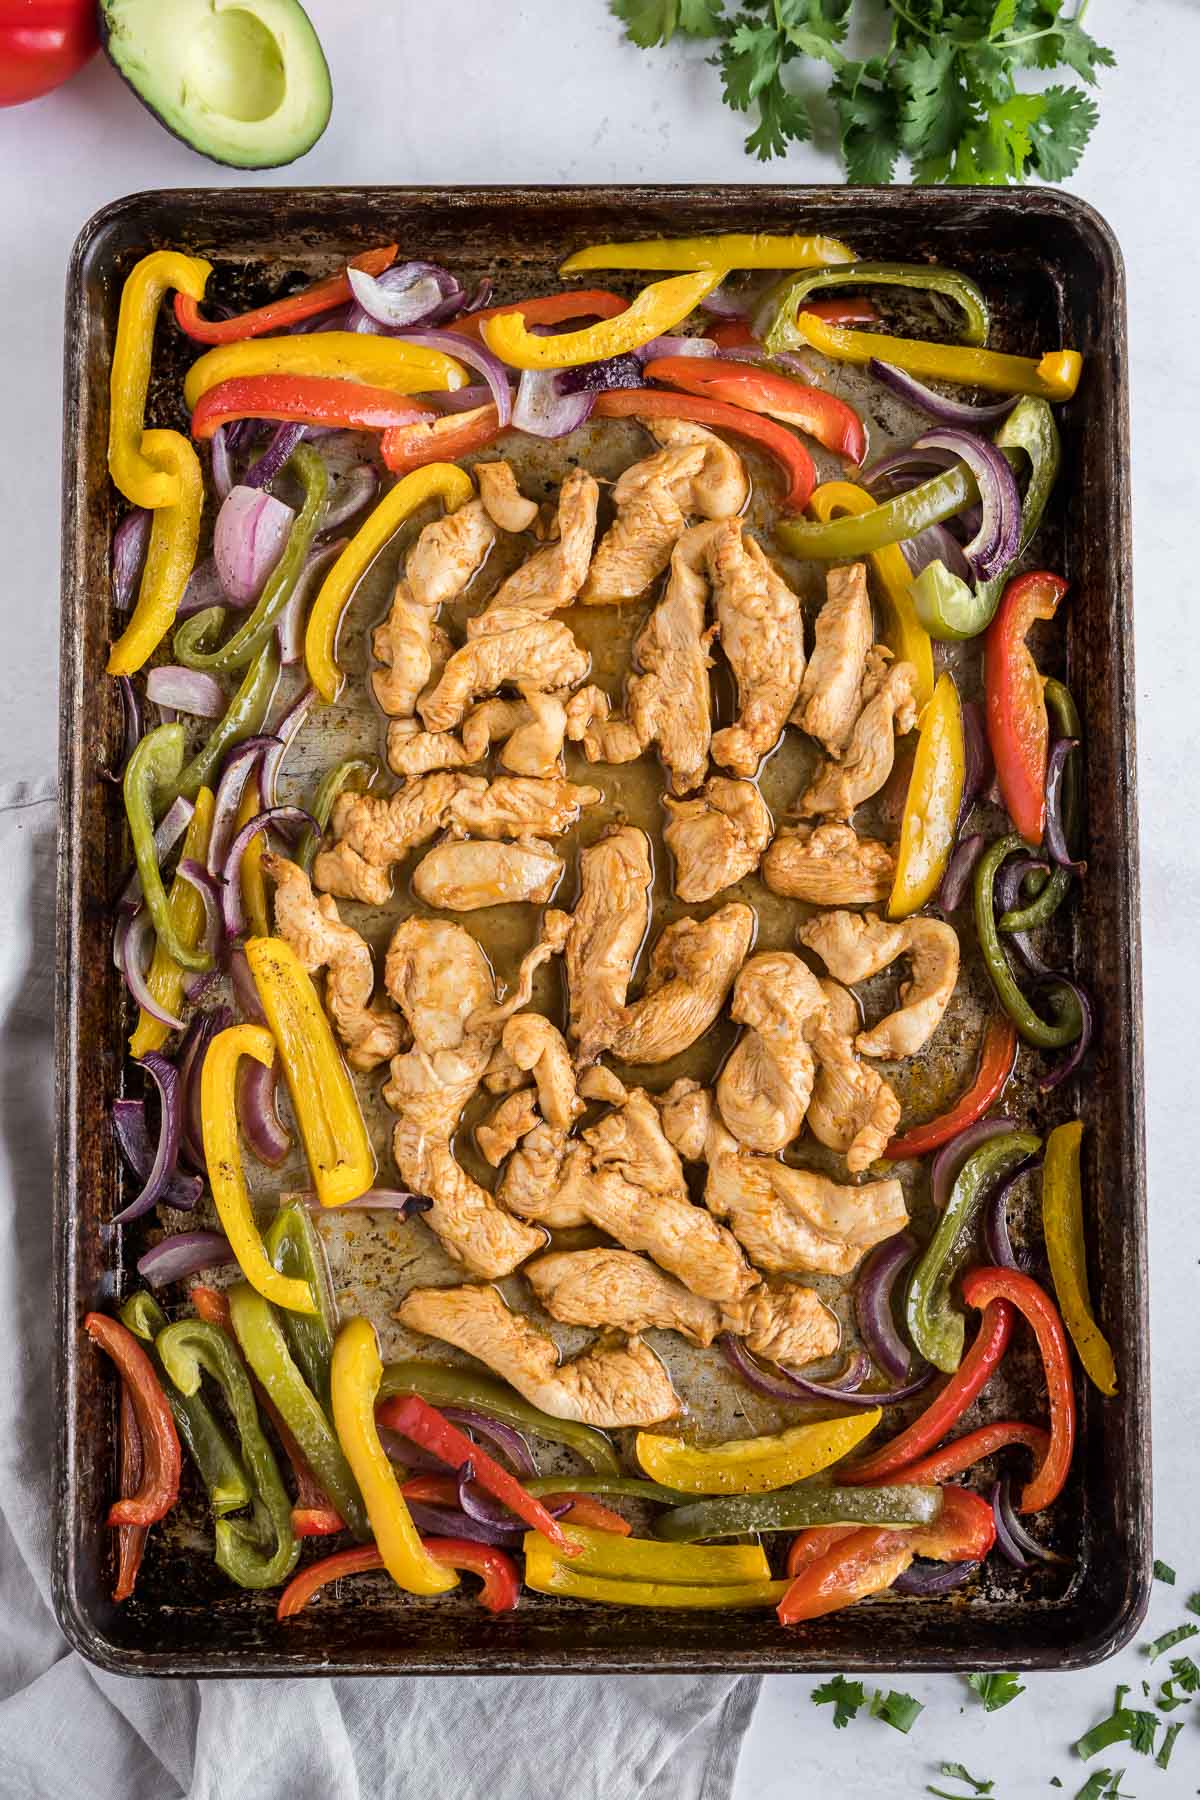 Lean chicken and healthy veggies are cooked together for fajitas.